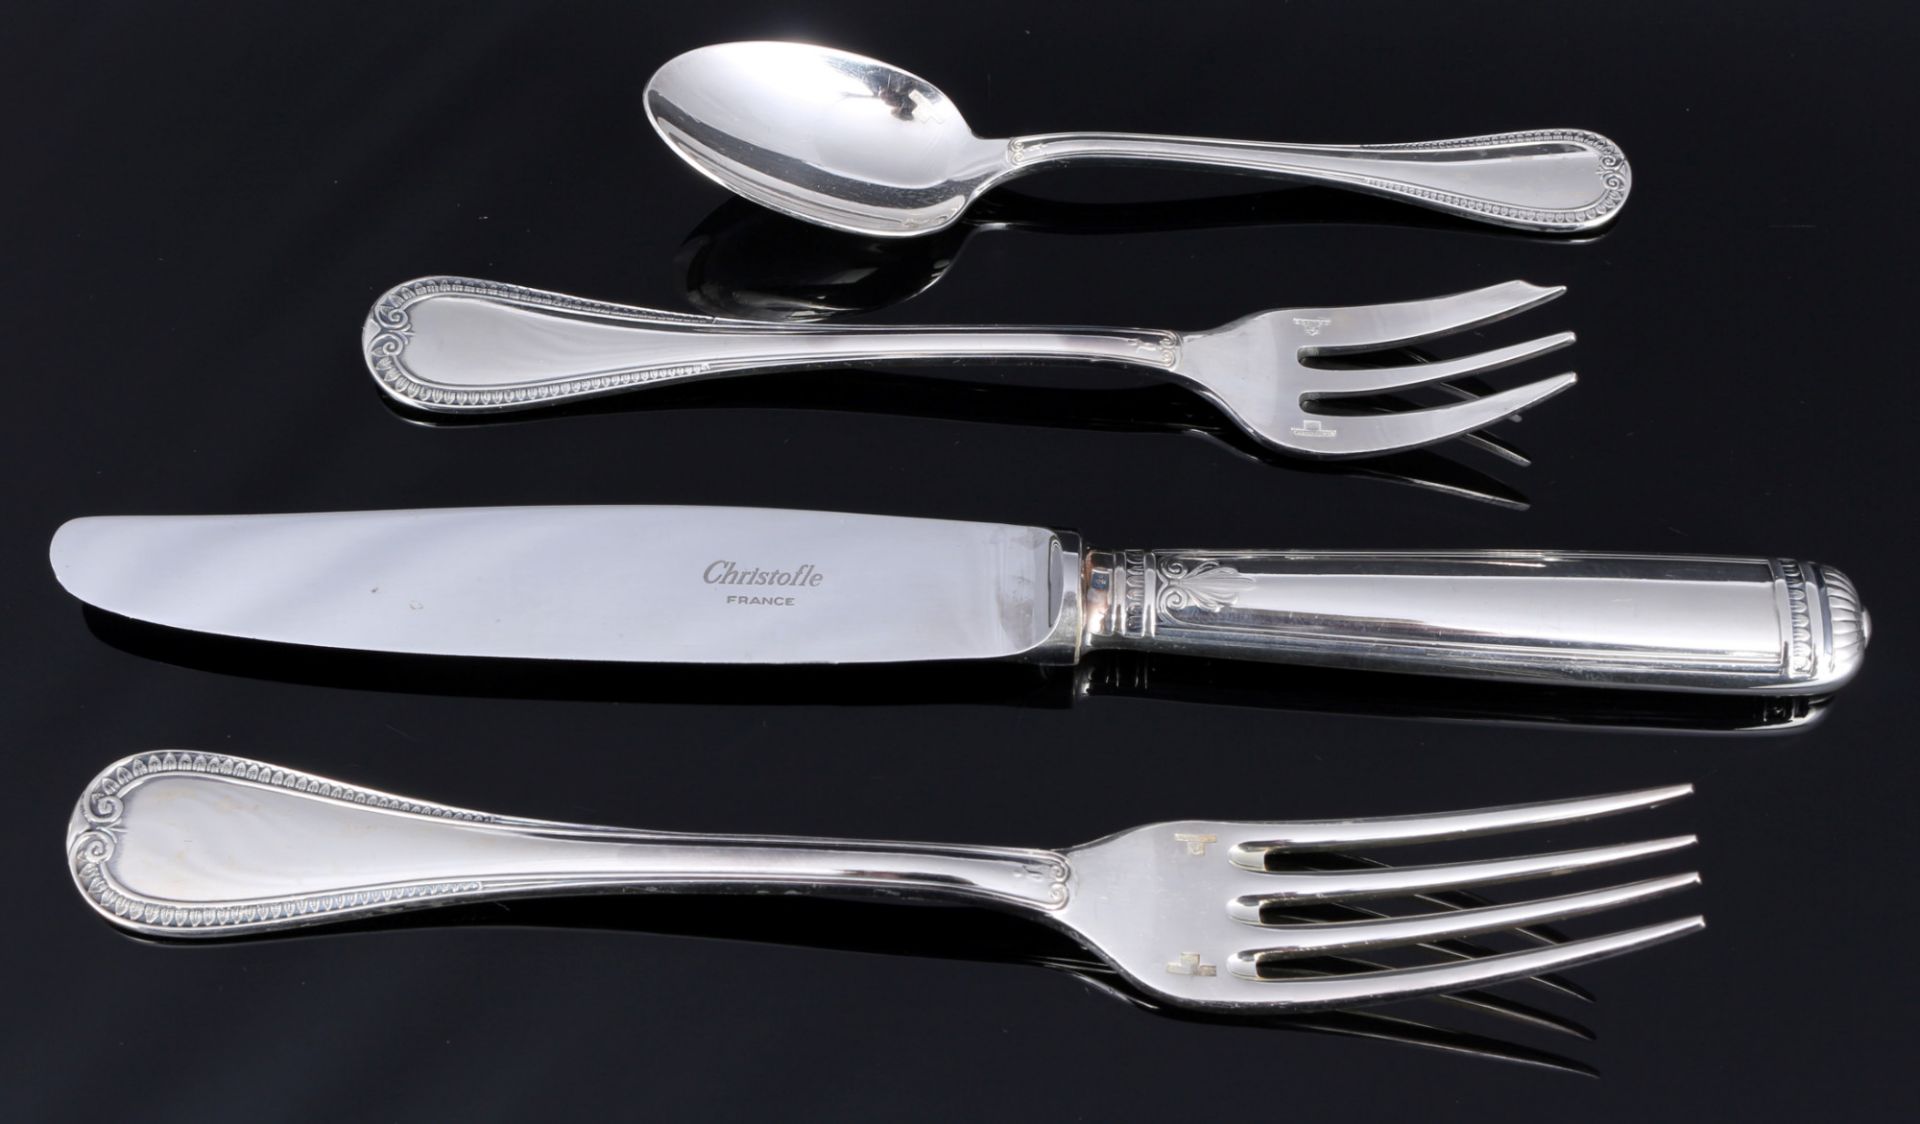 Christofle Malmaison 24-piece cutlery for 8 people, - Image 2 of 4